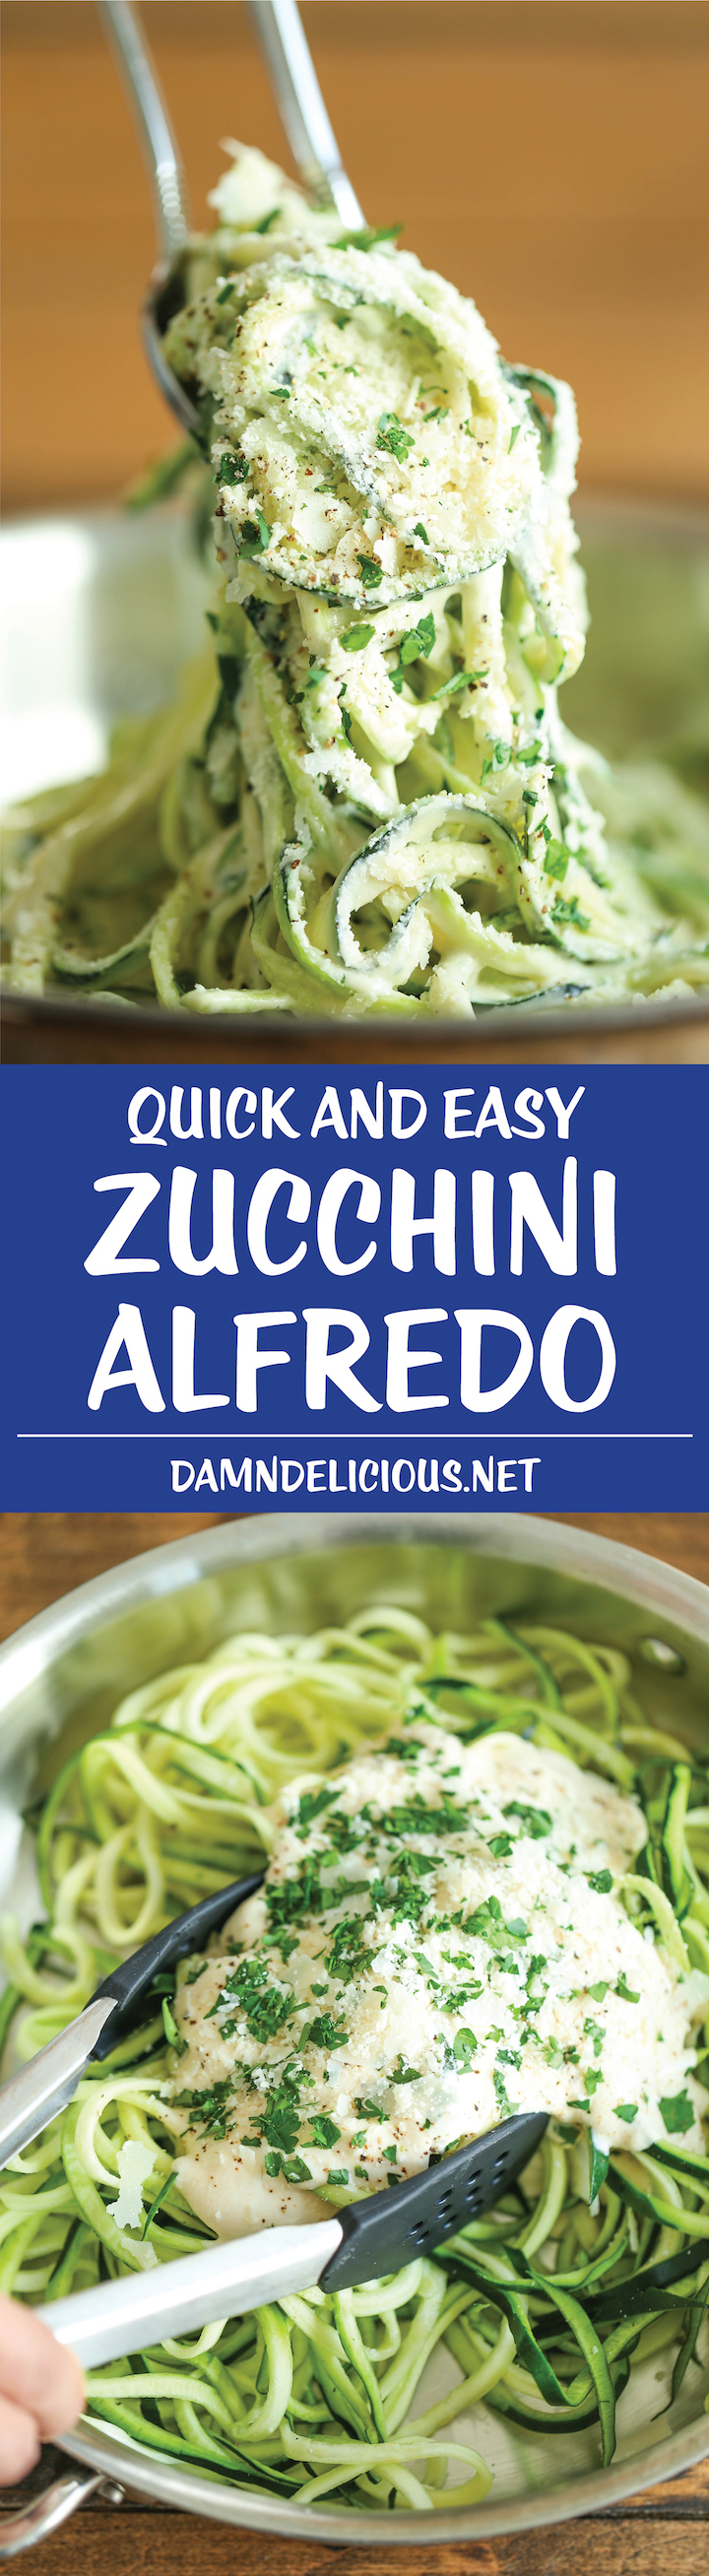 Zucchini Alfredo - Healthy, decadent, amazingly creamy AND low-carb. Finally, a guilt-less alfredo dish that the entire family can enjoy! 203.6 calories.